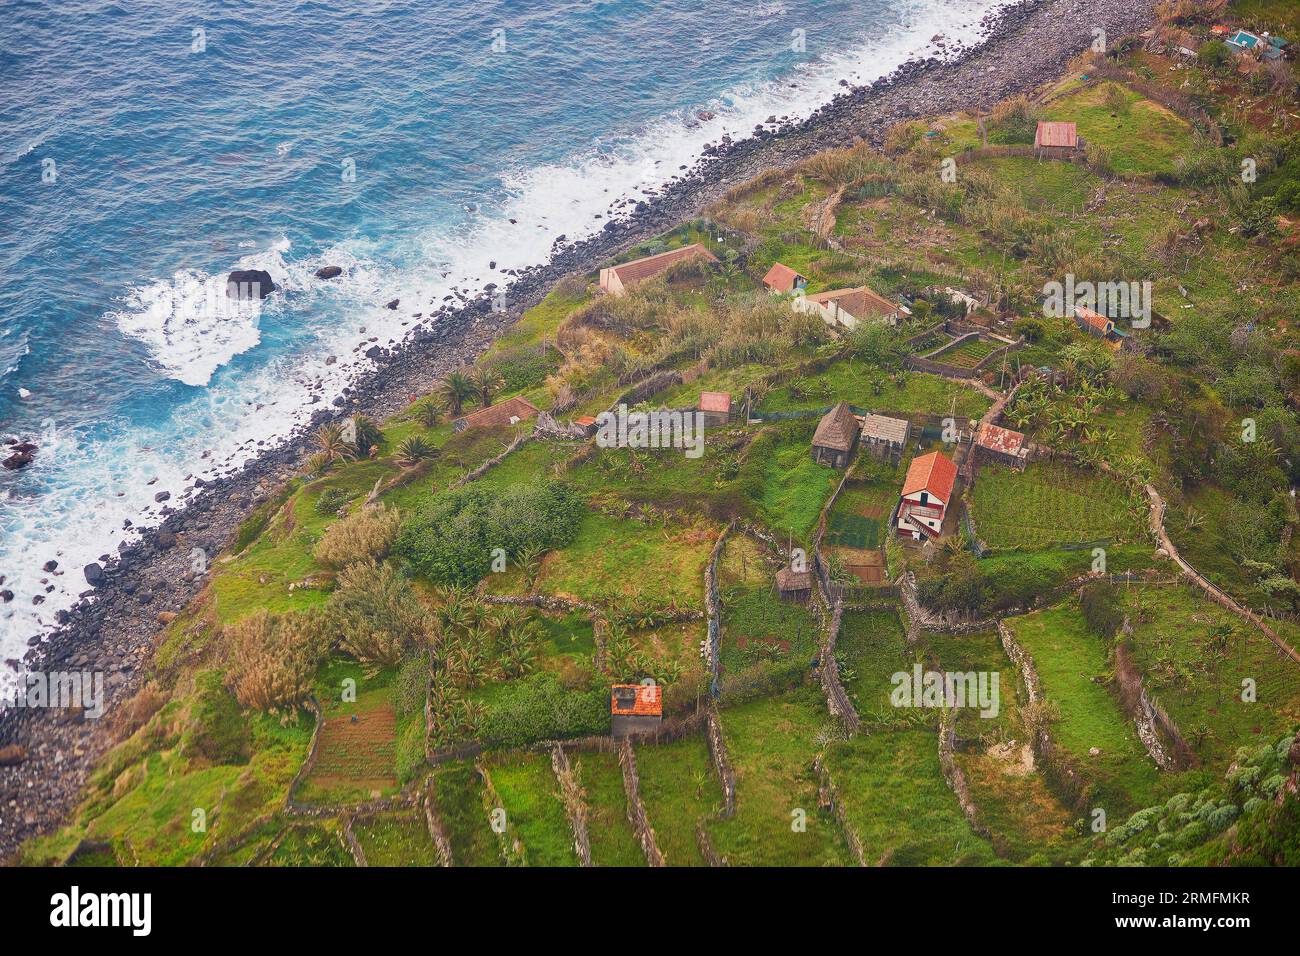 Aerial view of typical Madeira landscape with little villages, terrace fields and ocean Stock Photo